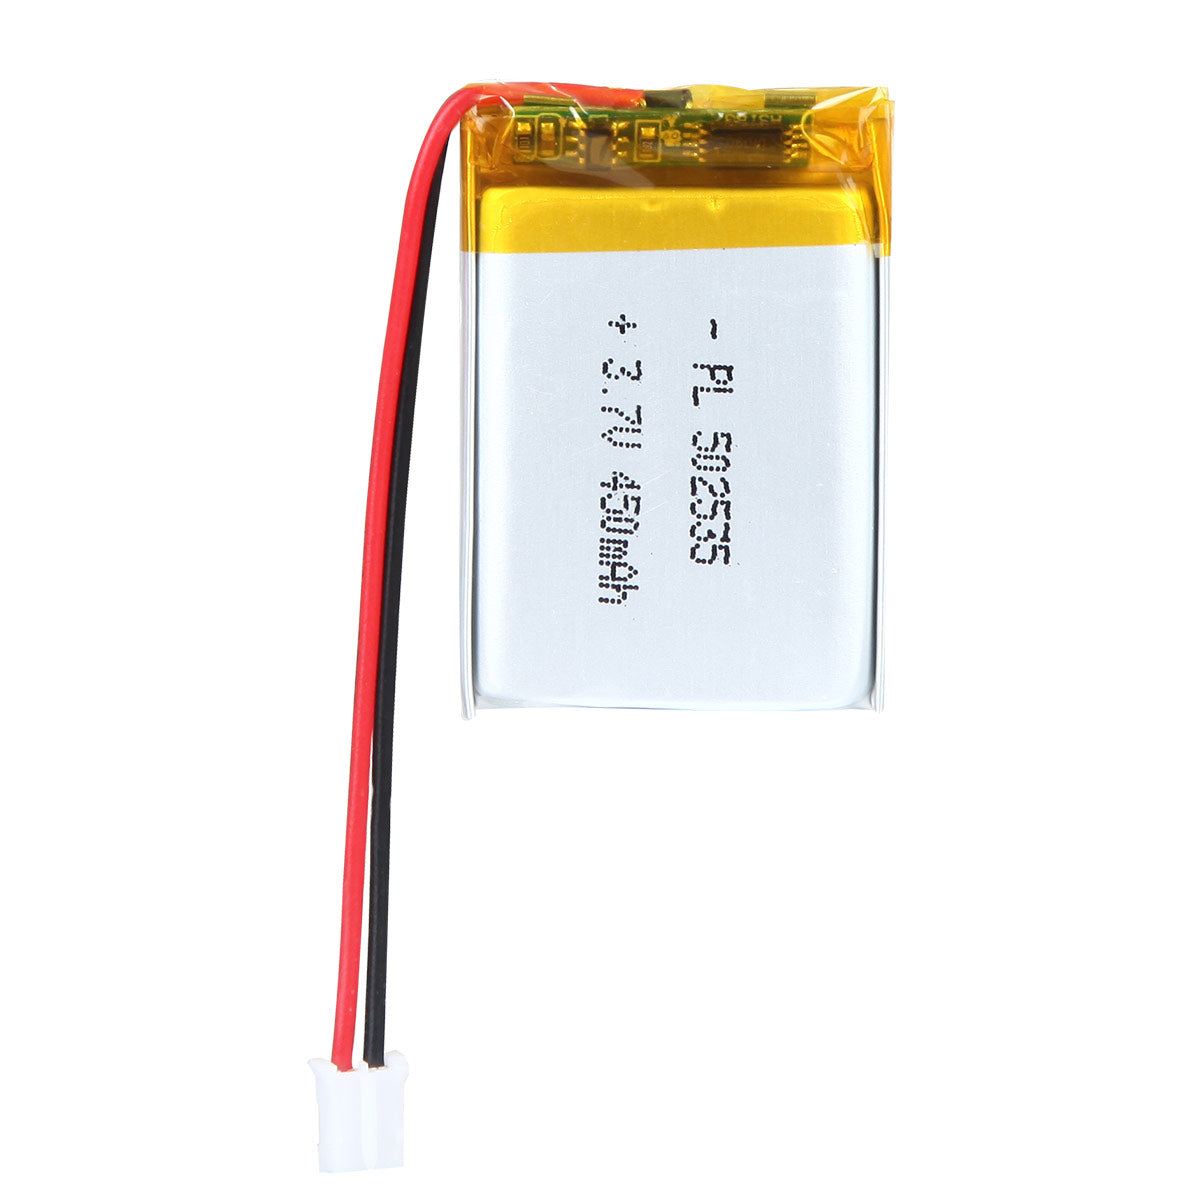 YDL 3.7V 450mAh 502535 Rechargeable Lipo Battery JST Connector - YDL Battery